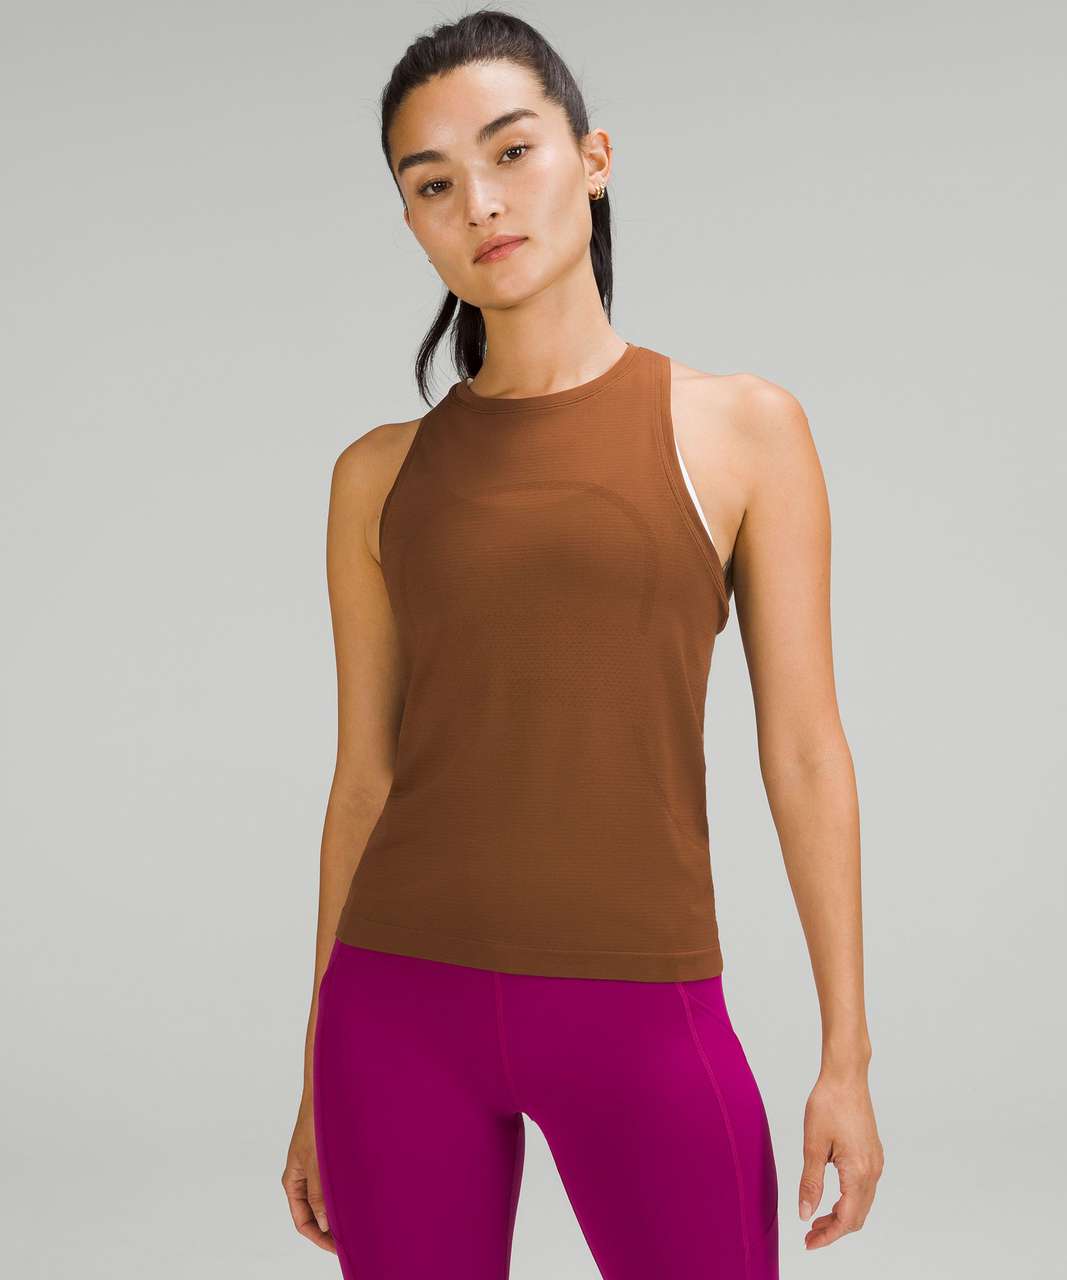 Lululemon Swiftly Tech High-Neck Tank Top 2.0 *Race Length - Roasted Brown / Roasted Brown